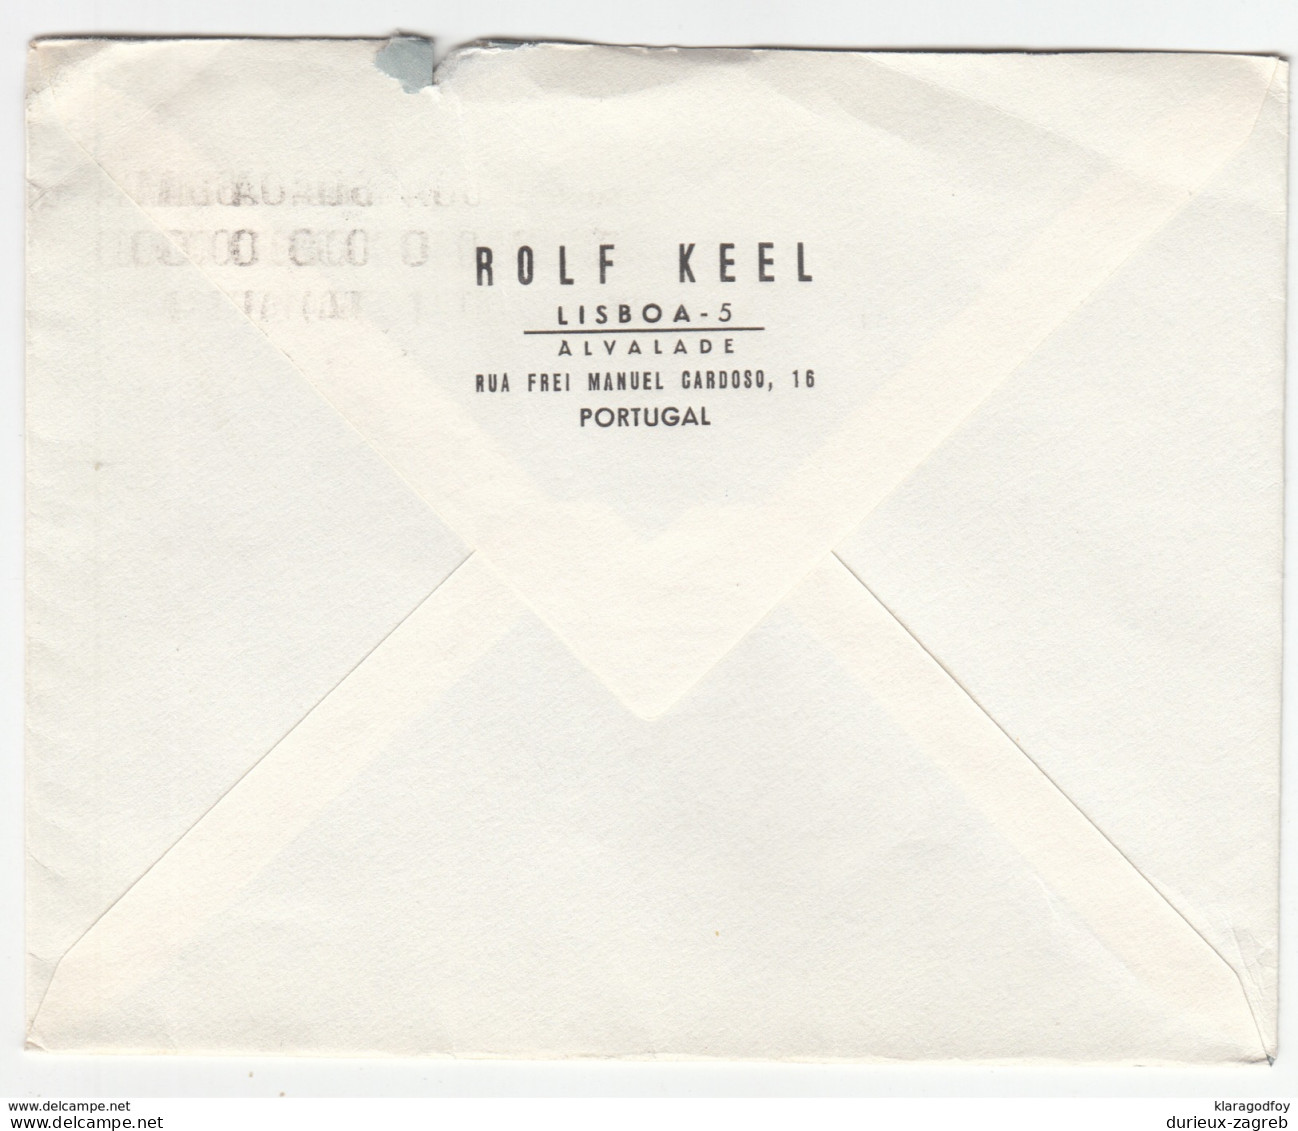 Portugal, Rolf Keel Company Letter Cover Travelled 1964 B171025 - Covers & Documents